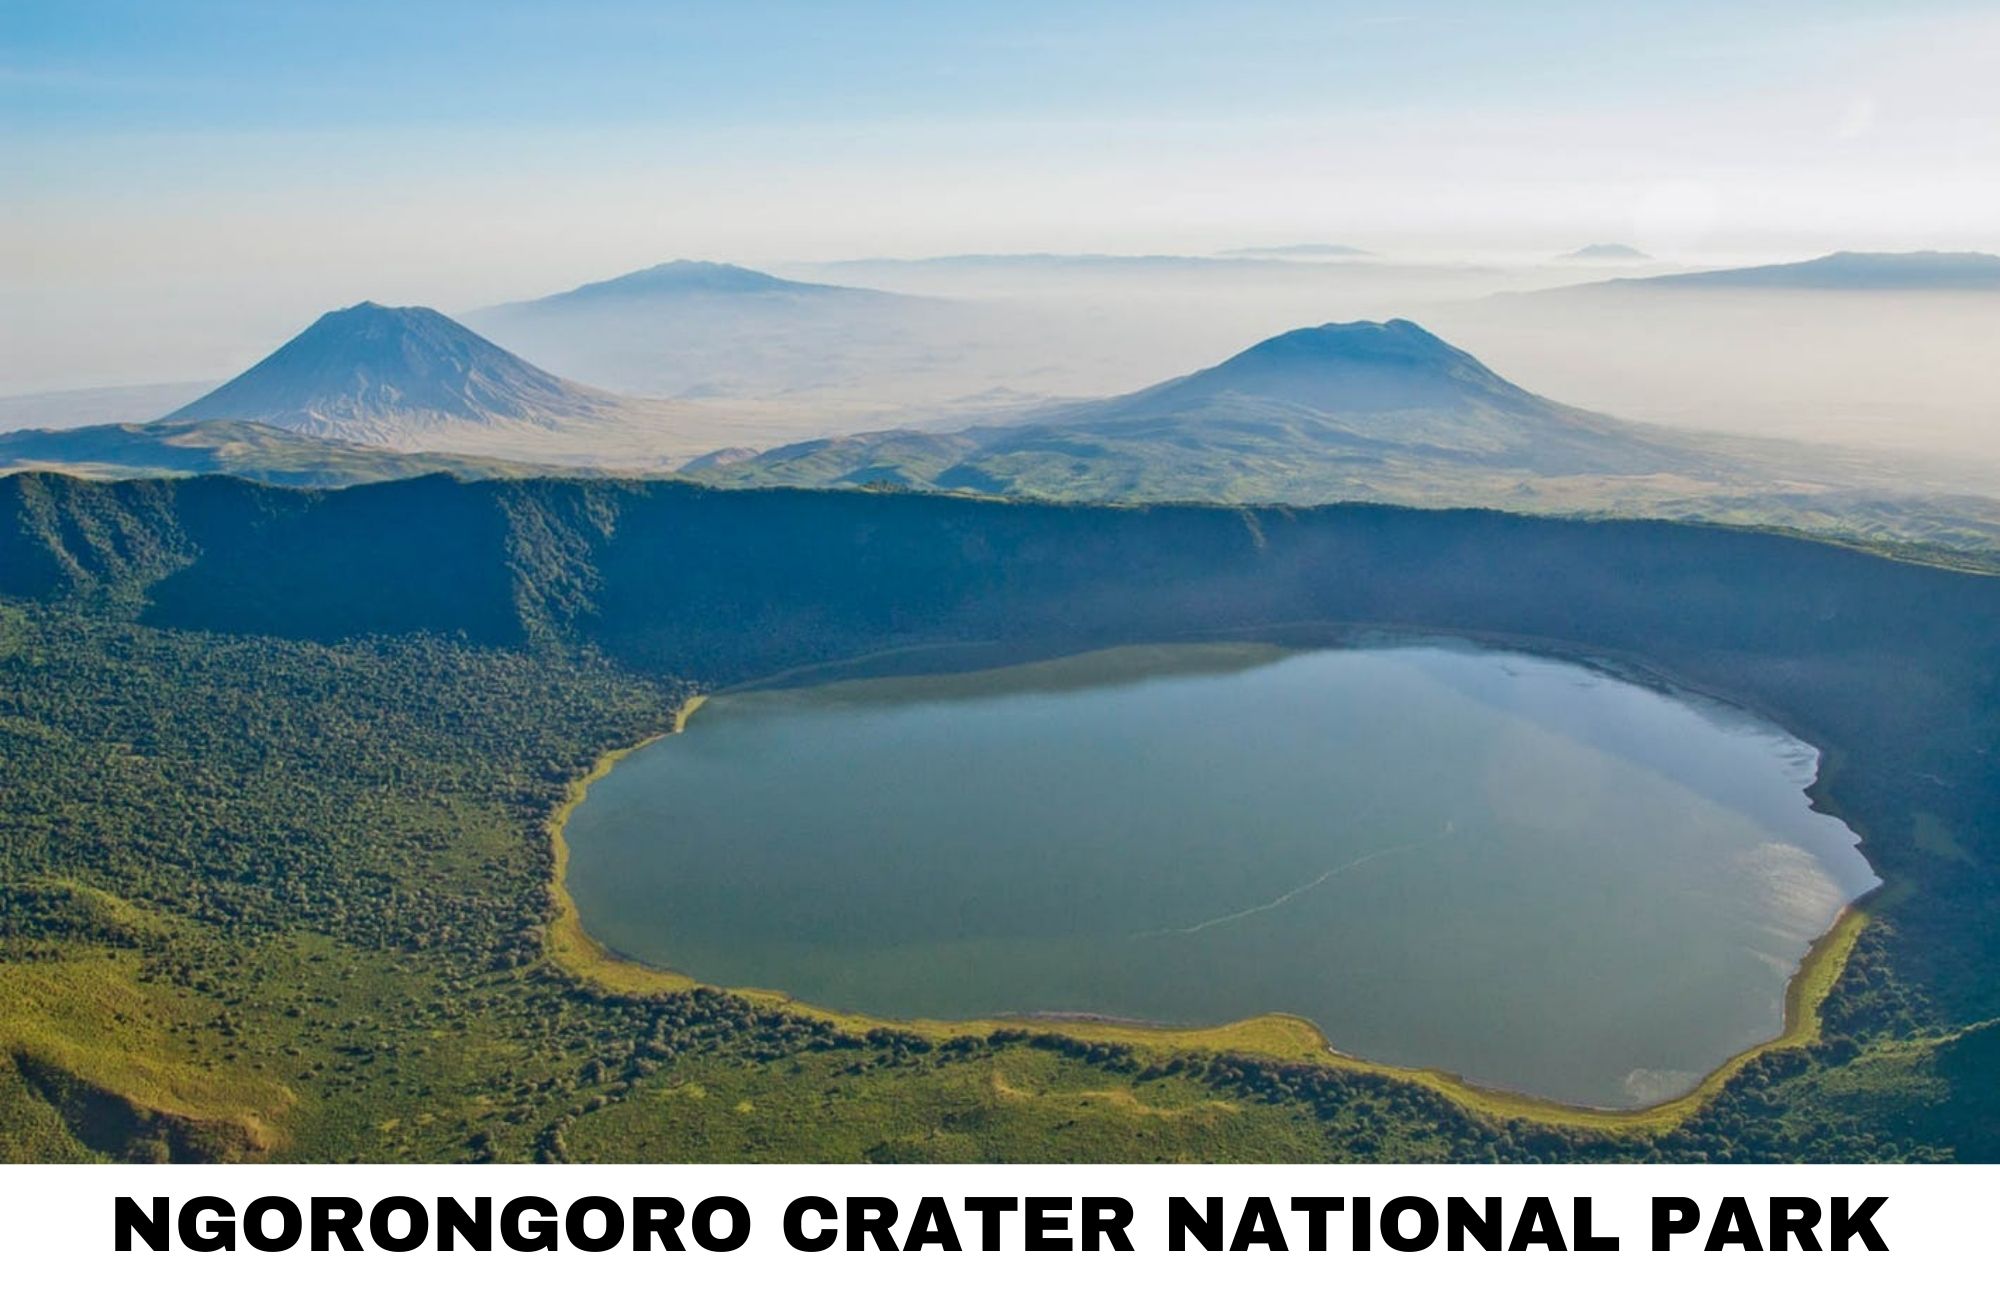 The Ngorongoro Conservation Area, which includes the volcano caldera